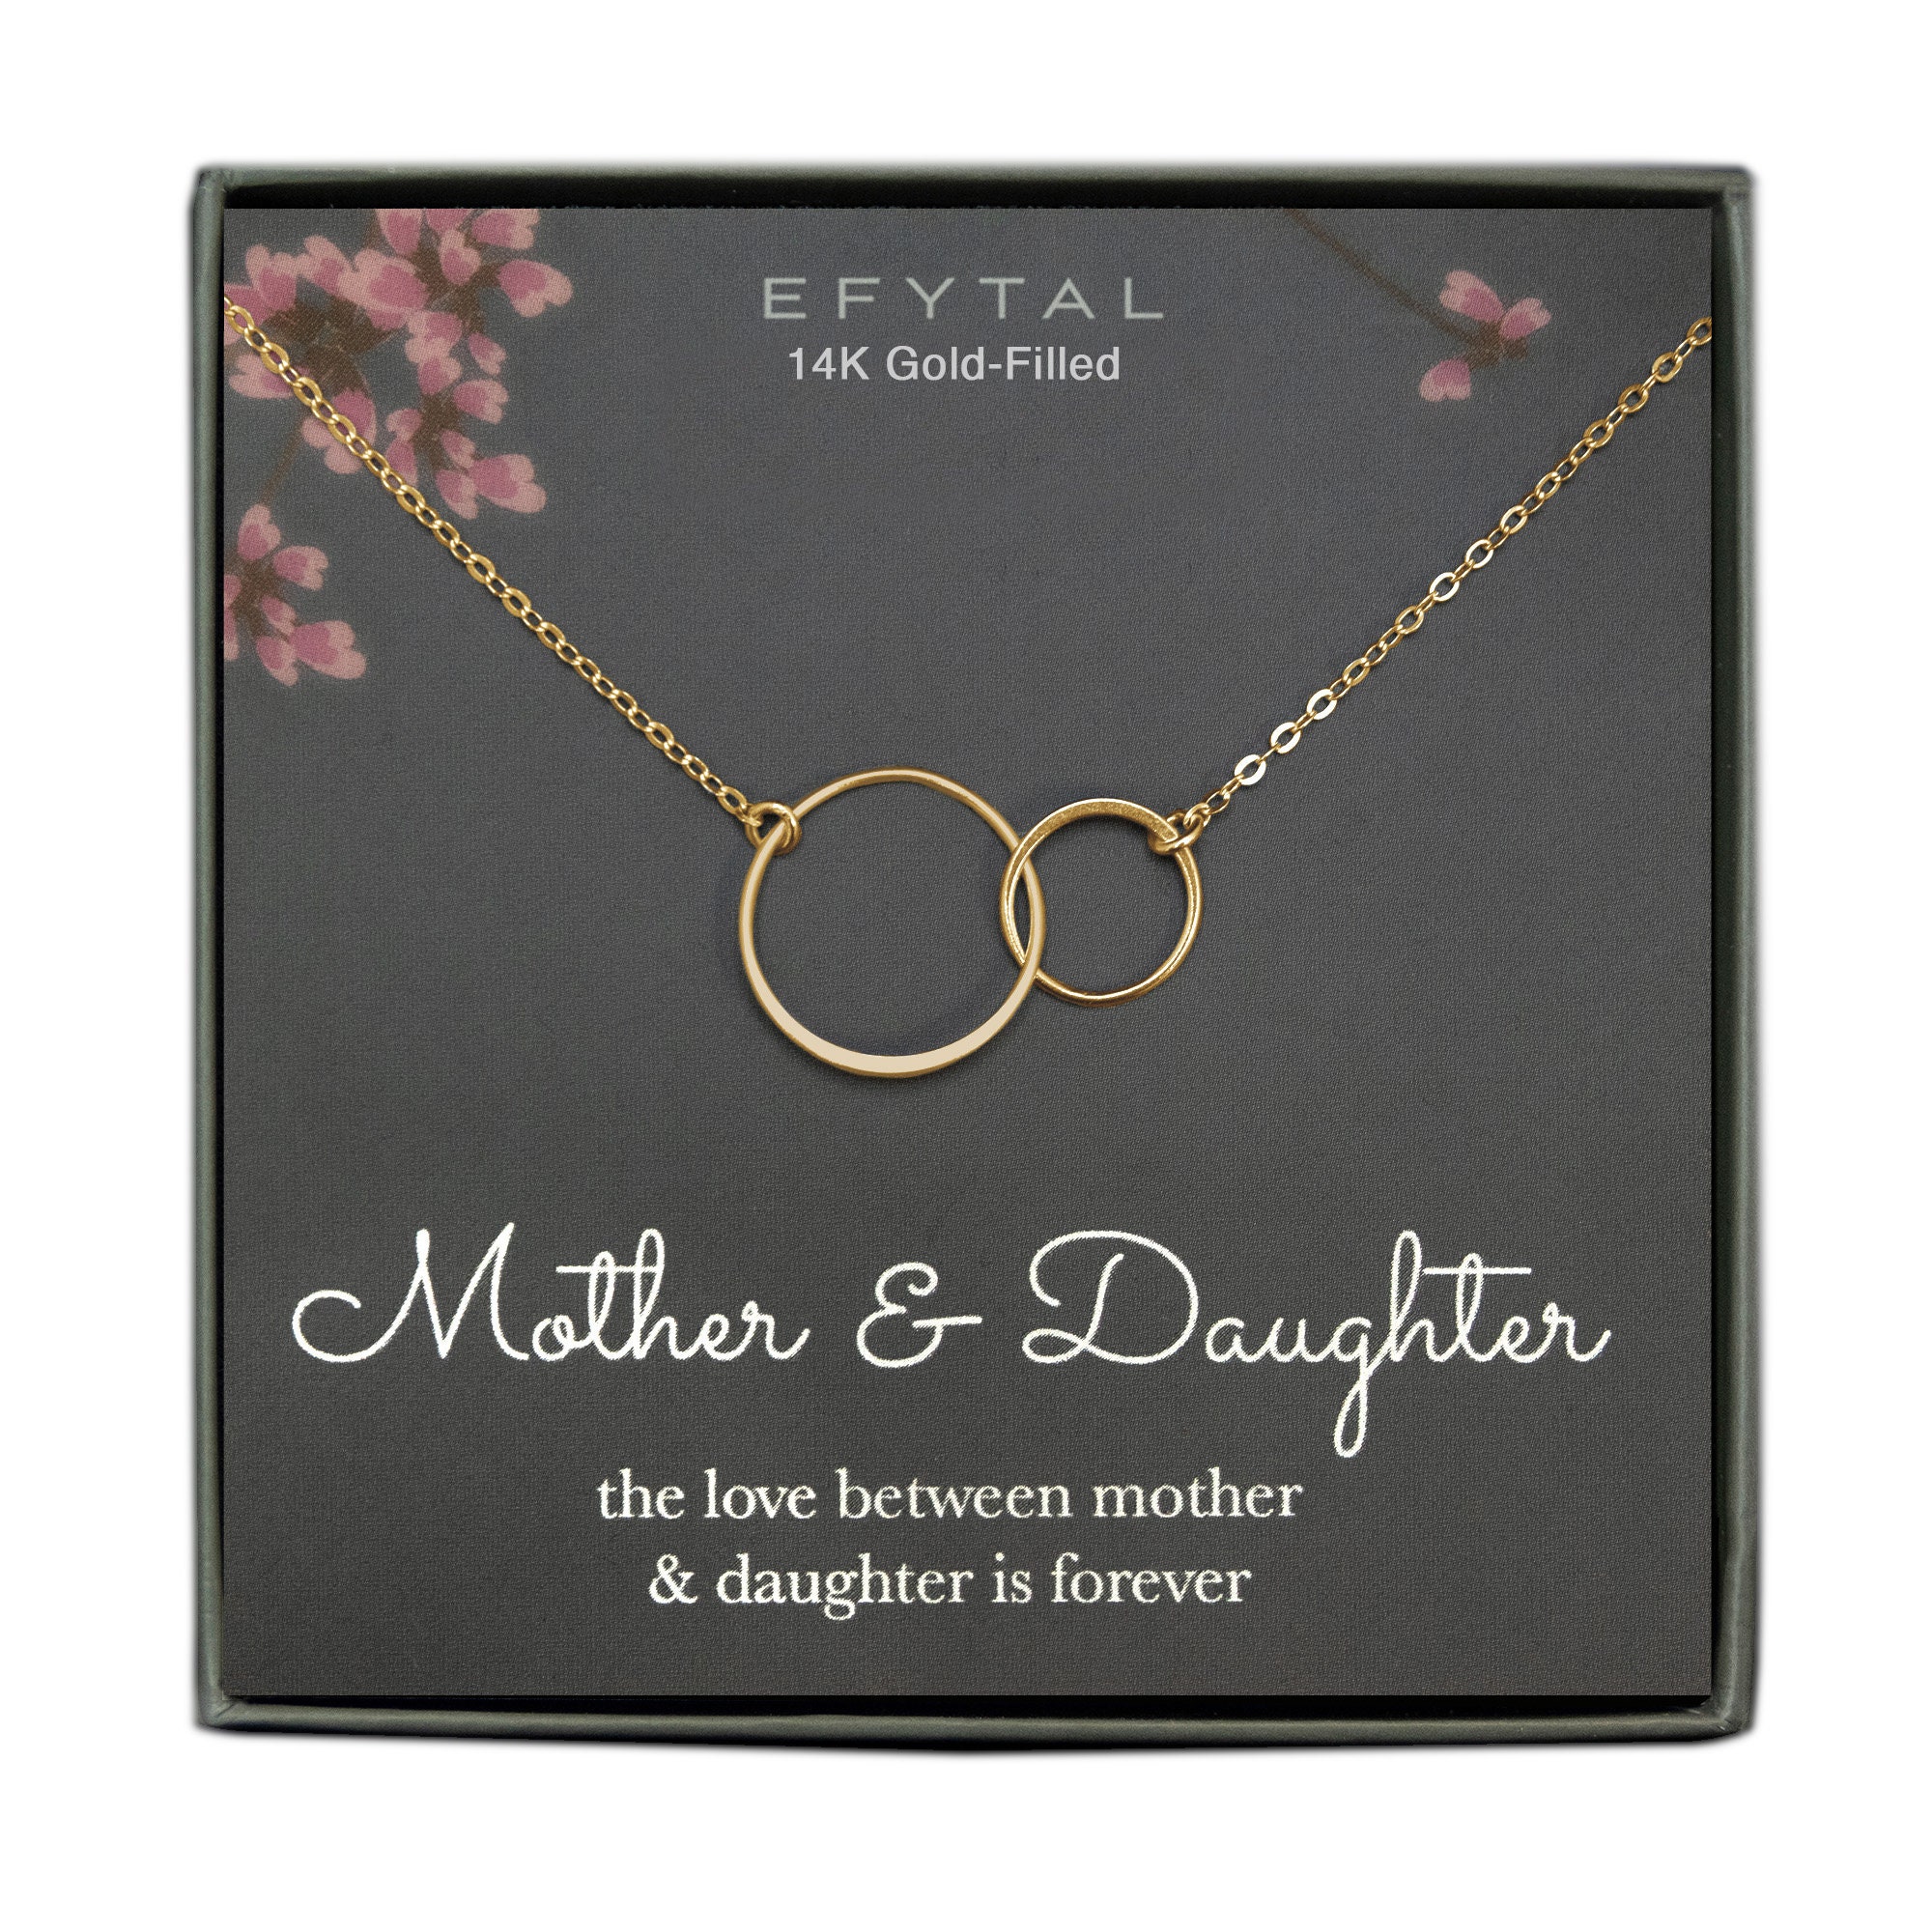 Christmas gifts for mom, mom gifts, mom necklace - SO-7705135 - ZILORRA |  Zilorrausa